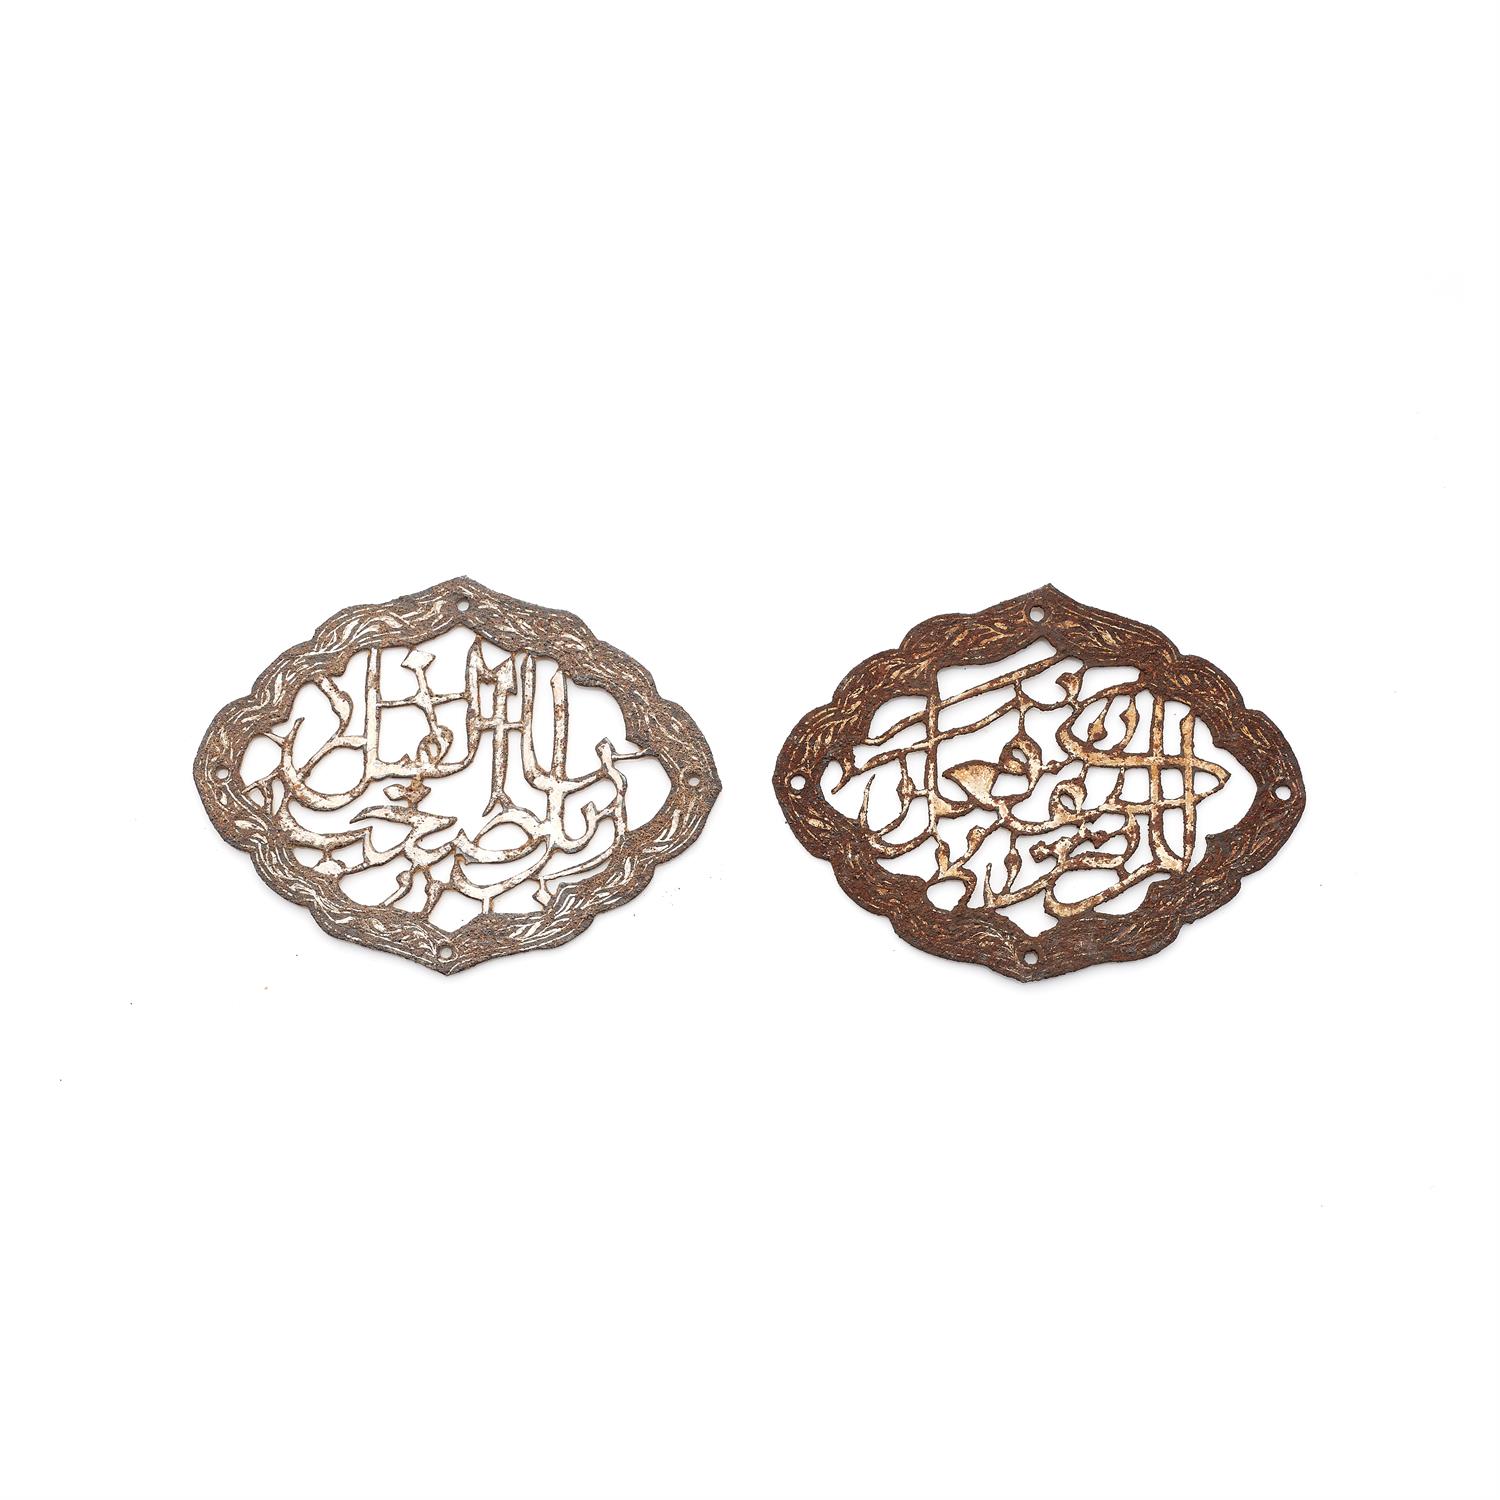 Six Qur'anic plaques, cut-steel with silver overlay [Eastern Ilkhanate provinces, c. 1380] - Image 3 of 5